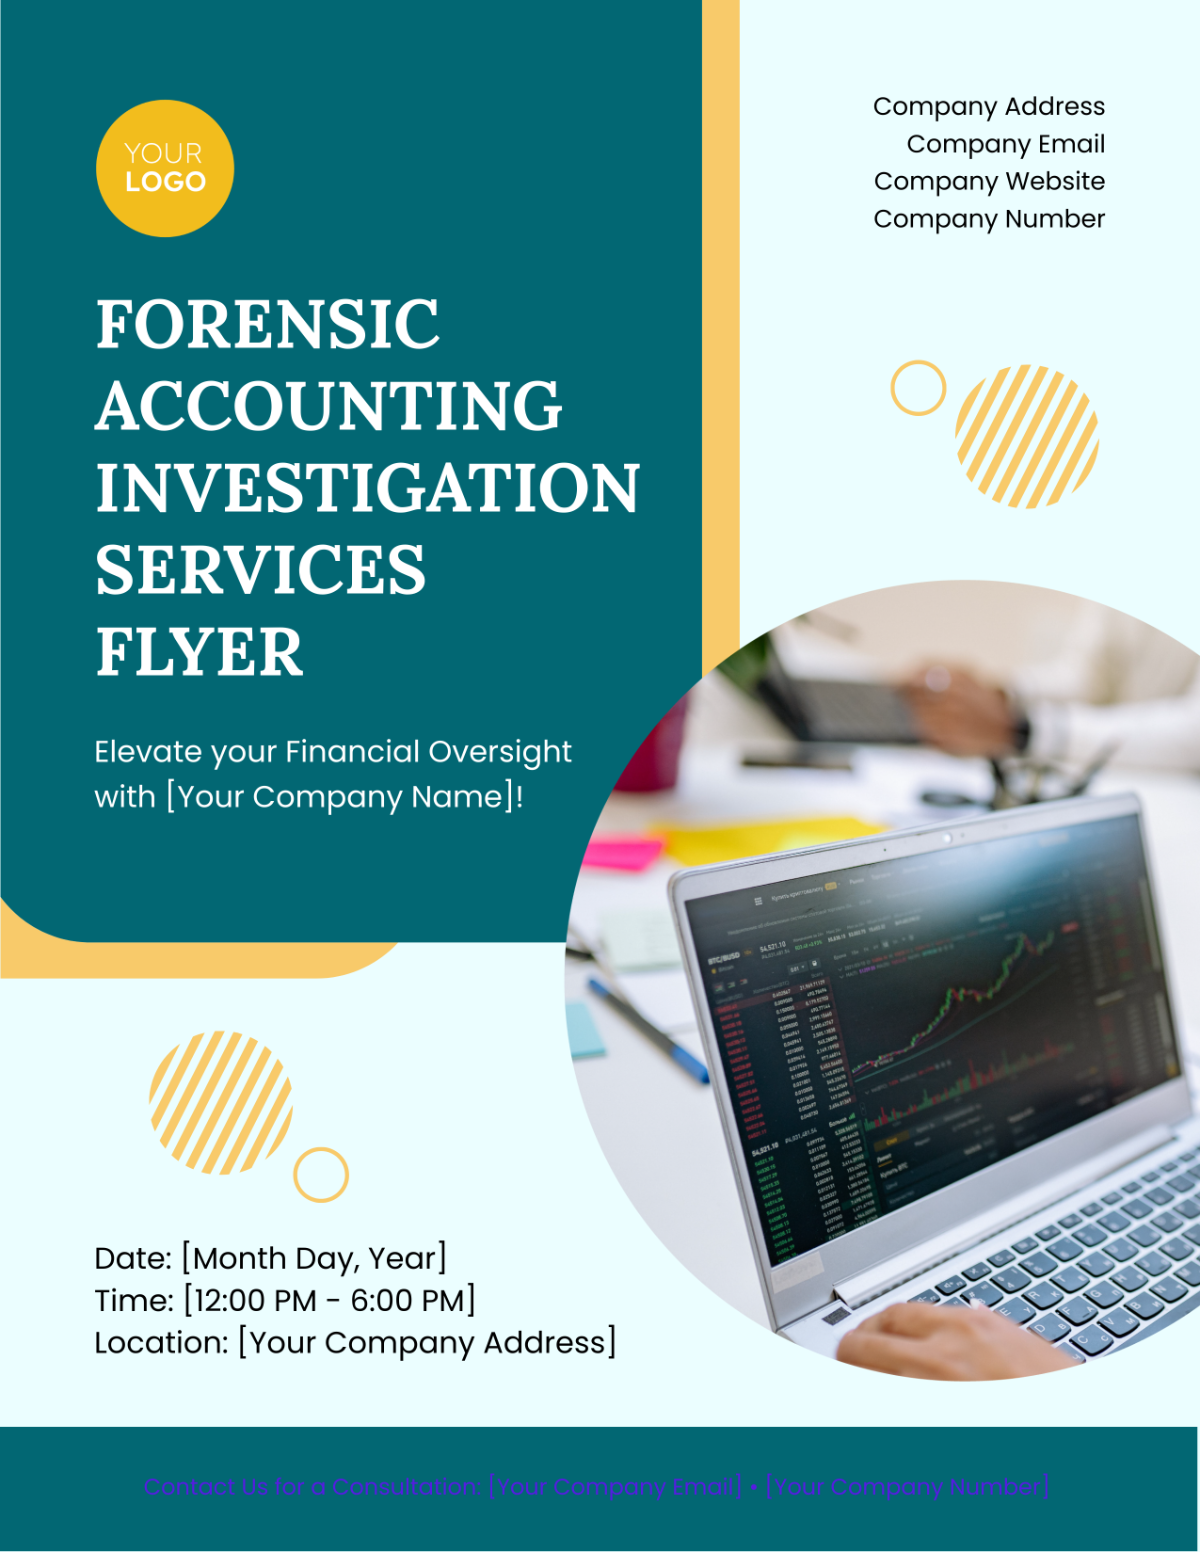 Forensic Accounting Investigation Services Flyer